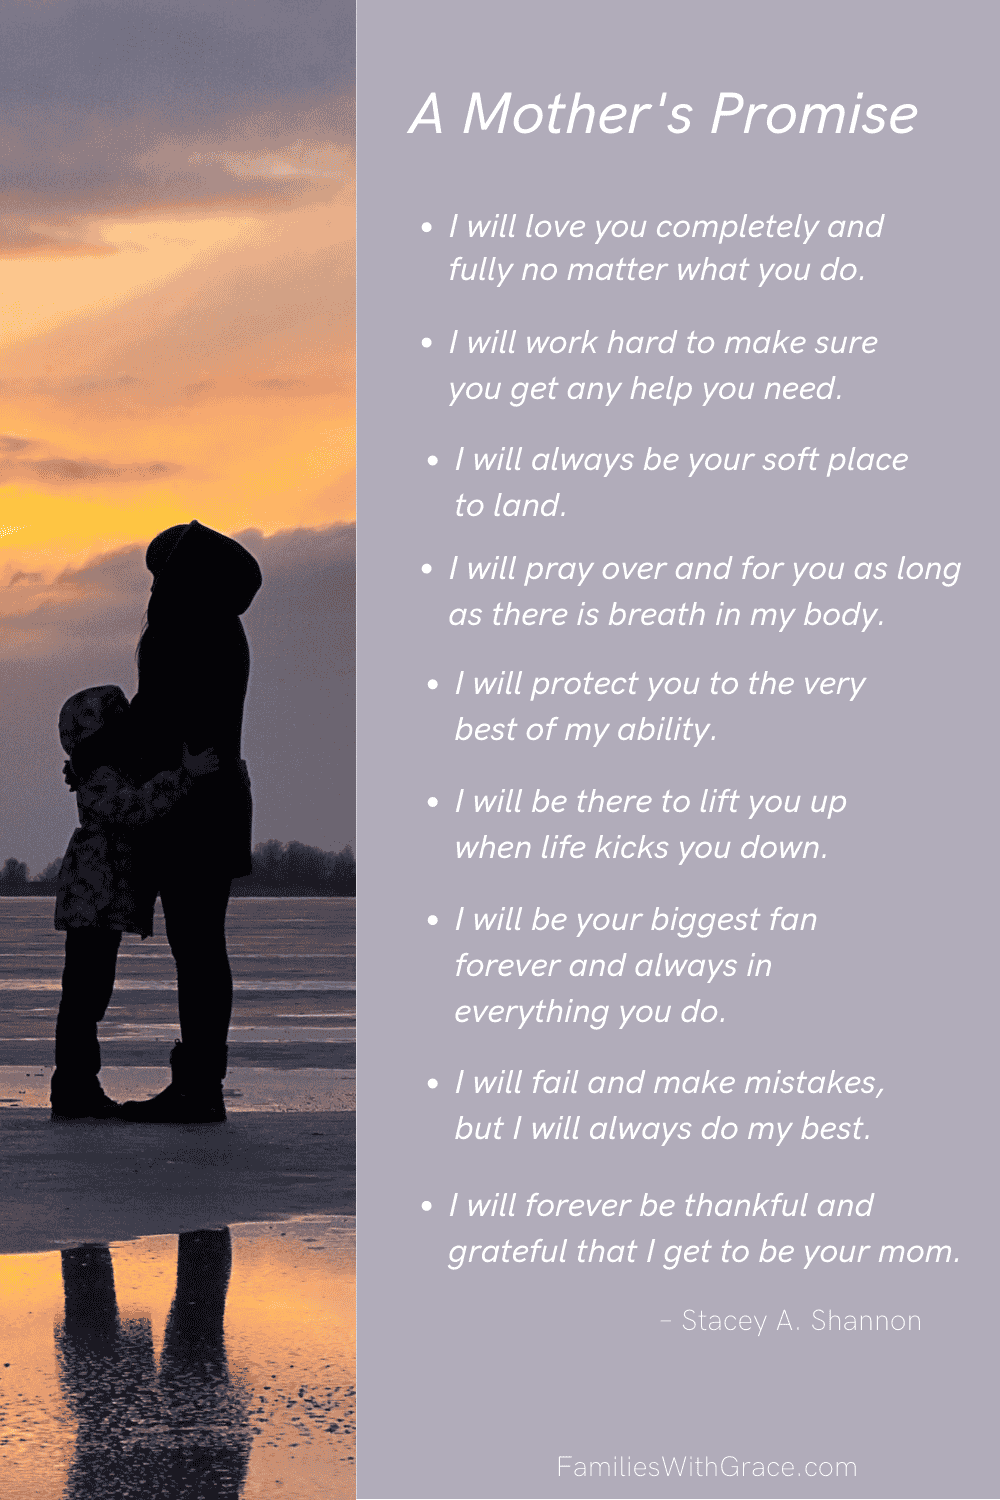 Parenting quotes to inspire you